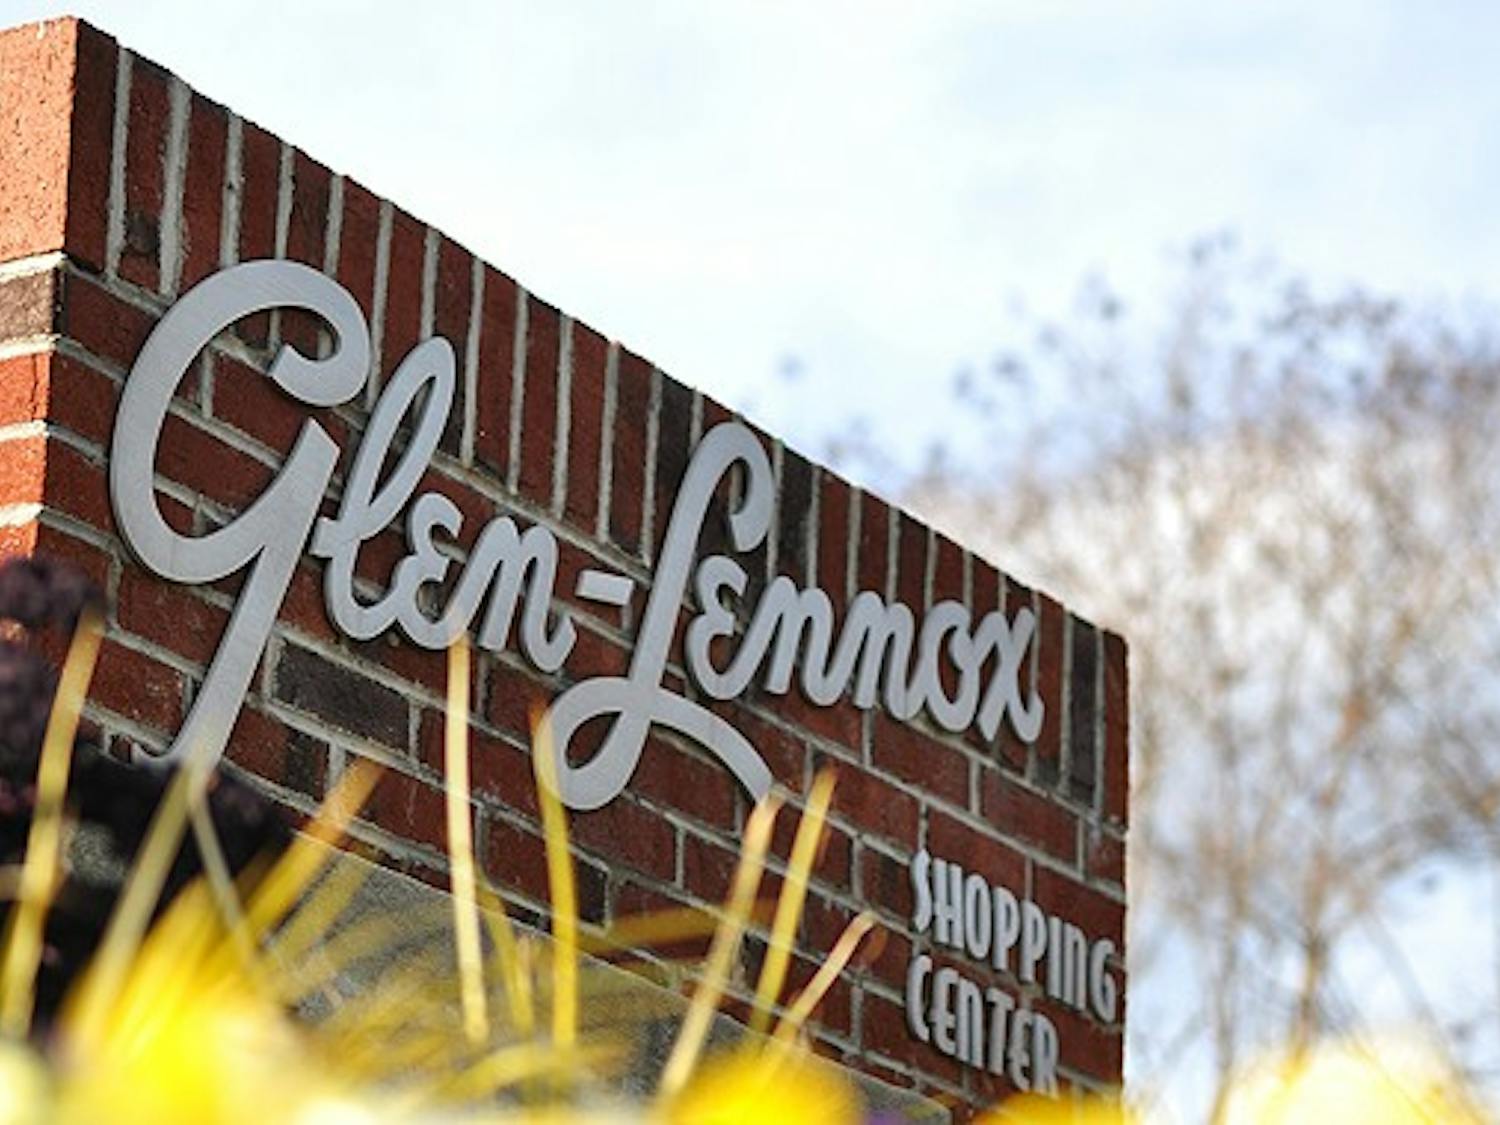 Glen Lennox apartments and shopping center is located in Chapel Hill, N.C.